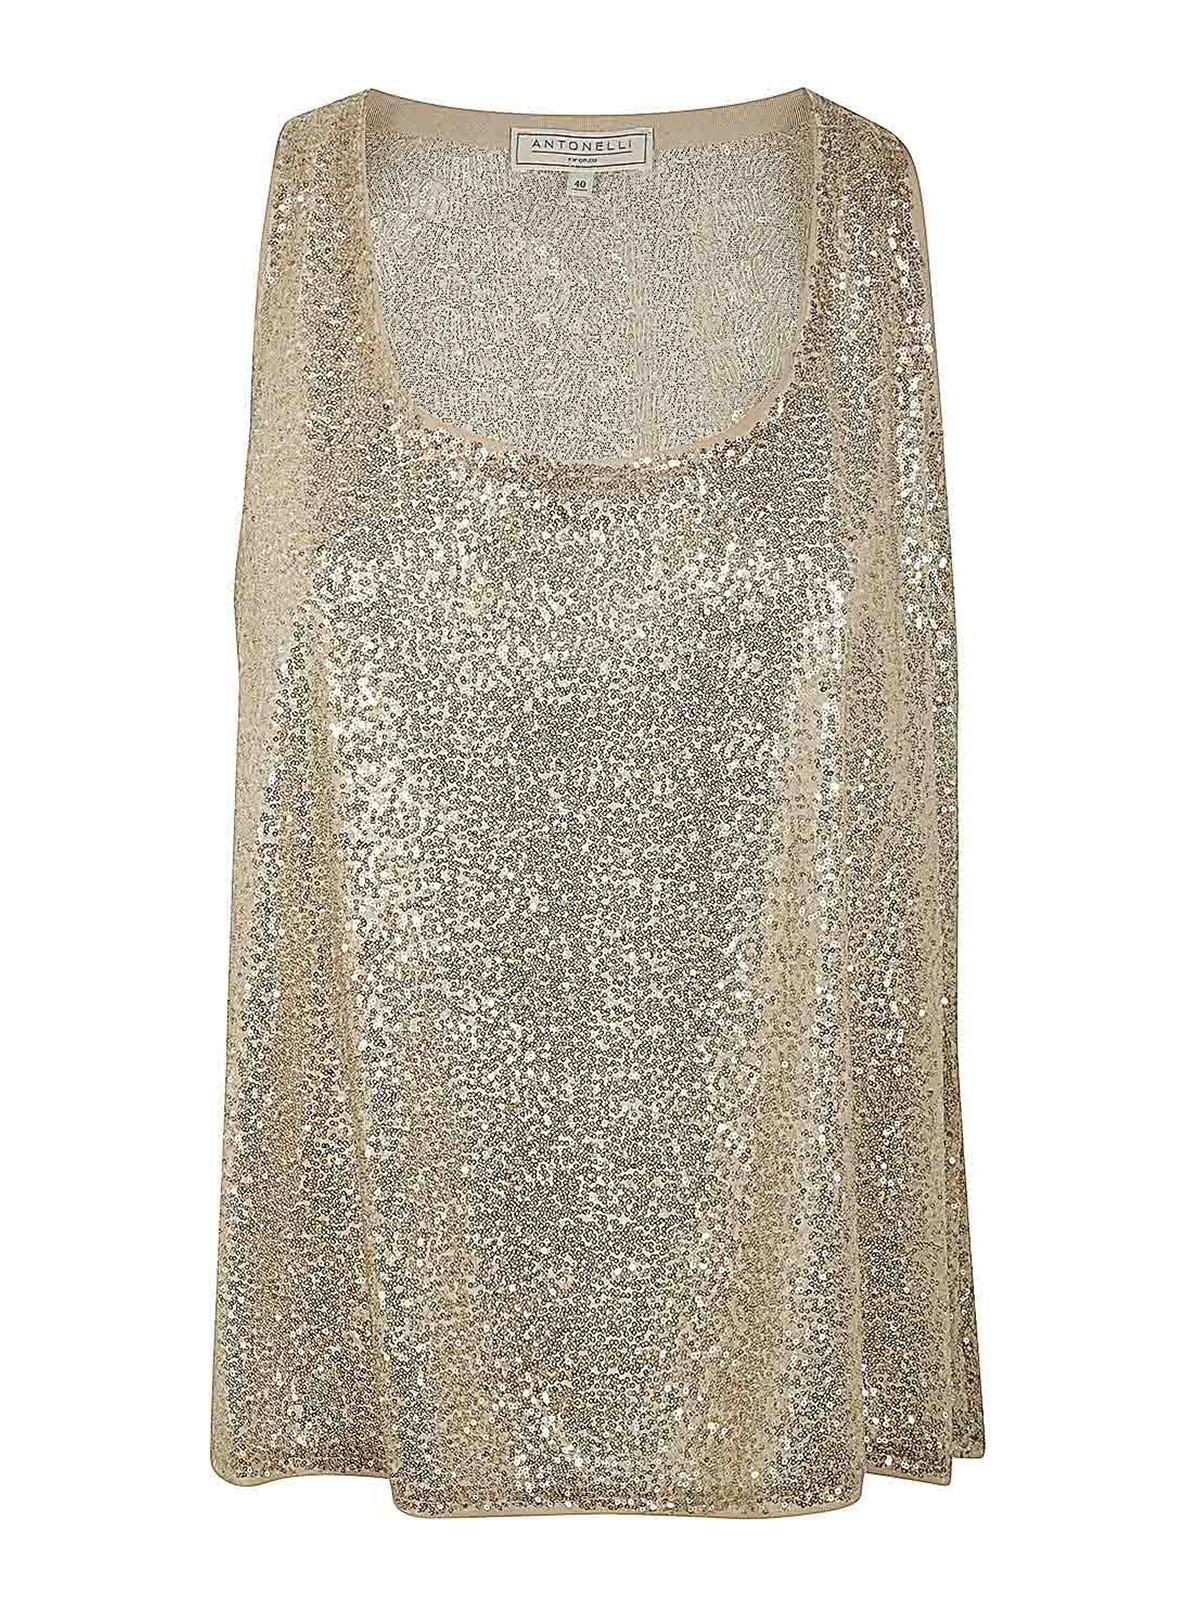 Antonelli Firenze Cecil Top With Paillettes In Silver